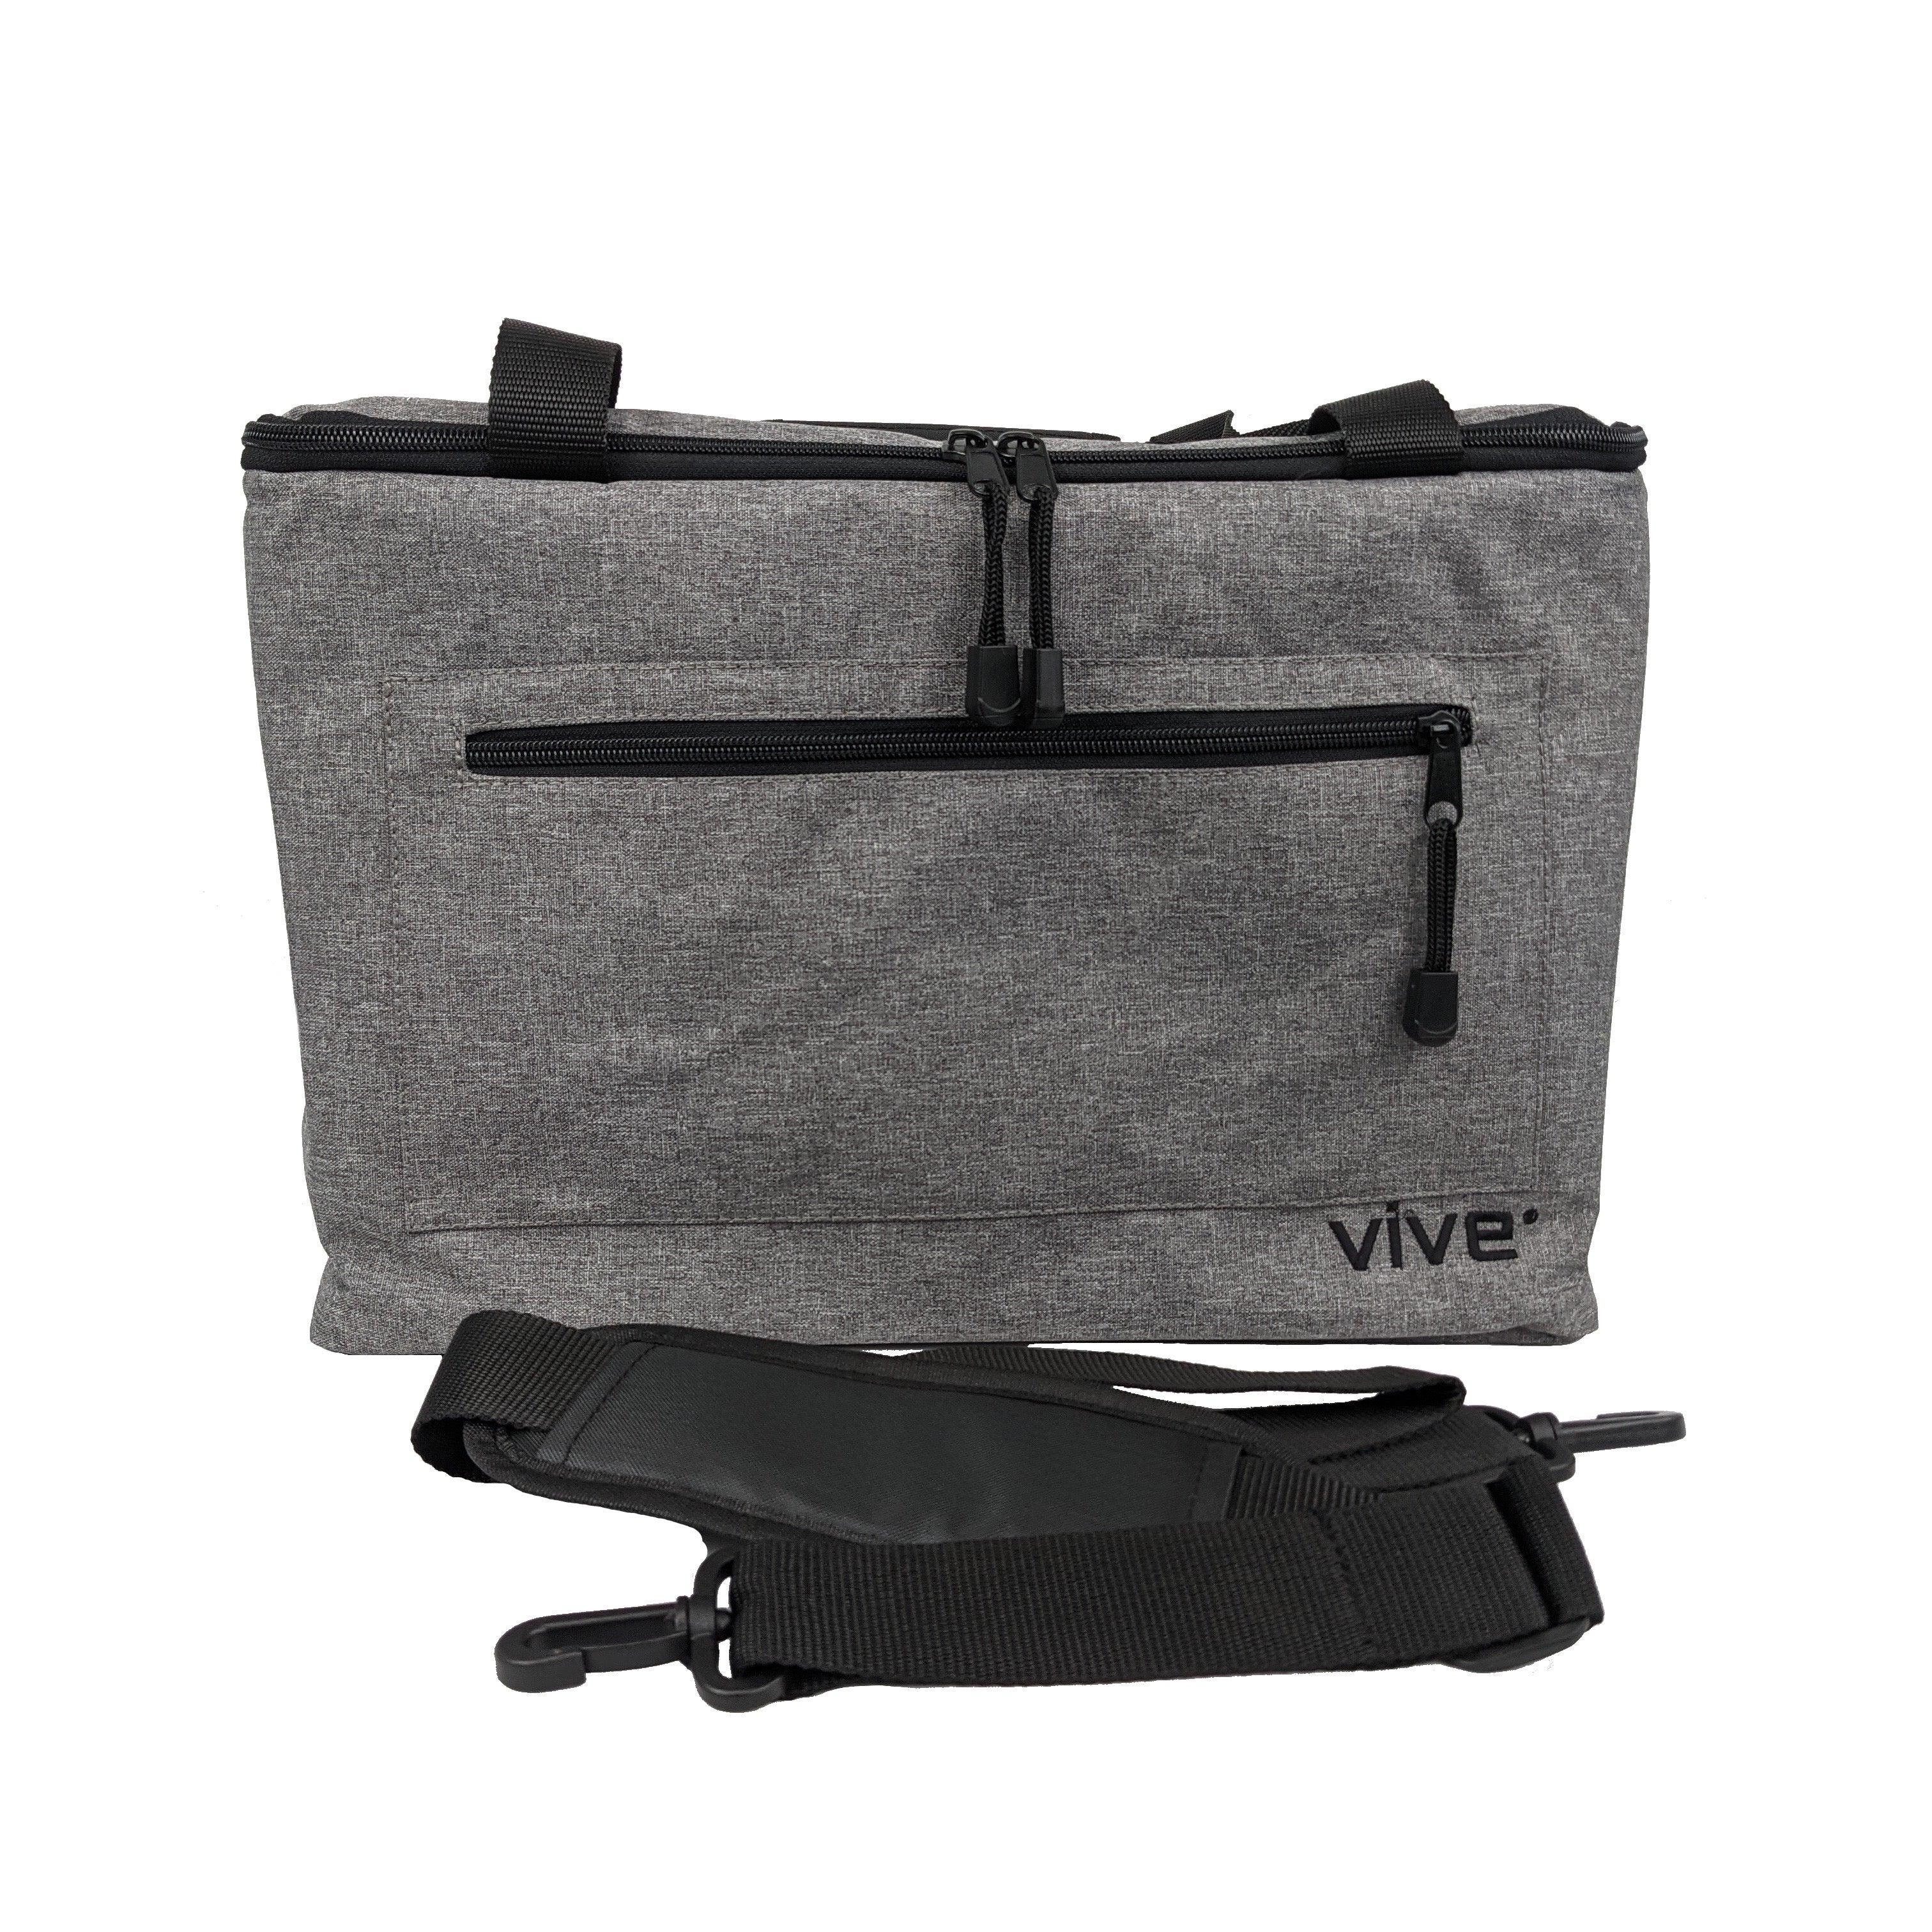 Cold Therapy Multi-Use Carry Bag - LVA2094GRY Cold Therapy Multi-Use Carry Bag - undefined by Supply Physical Therapy Accessories, Aircast Accessories, Breg, Breg Accessories, Breg Polar Care Wave, Breg Wave Accessories, Classic3 Accessories, Clear3, Clear3 Accessories, Cub Accessories, Cube, Cube Accessories, Donjoy Accessories, Glacier Accessories, Kodiak, Replacement